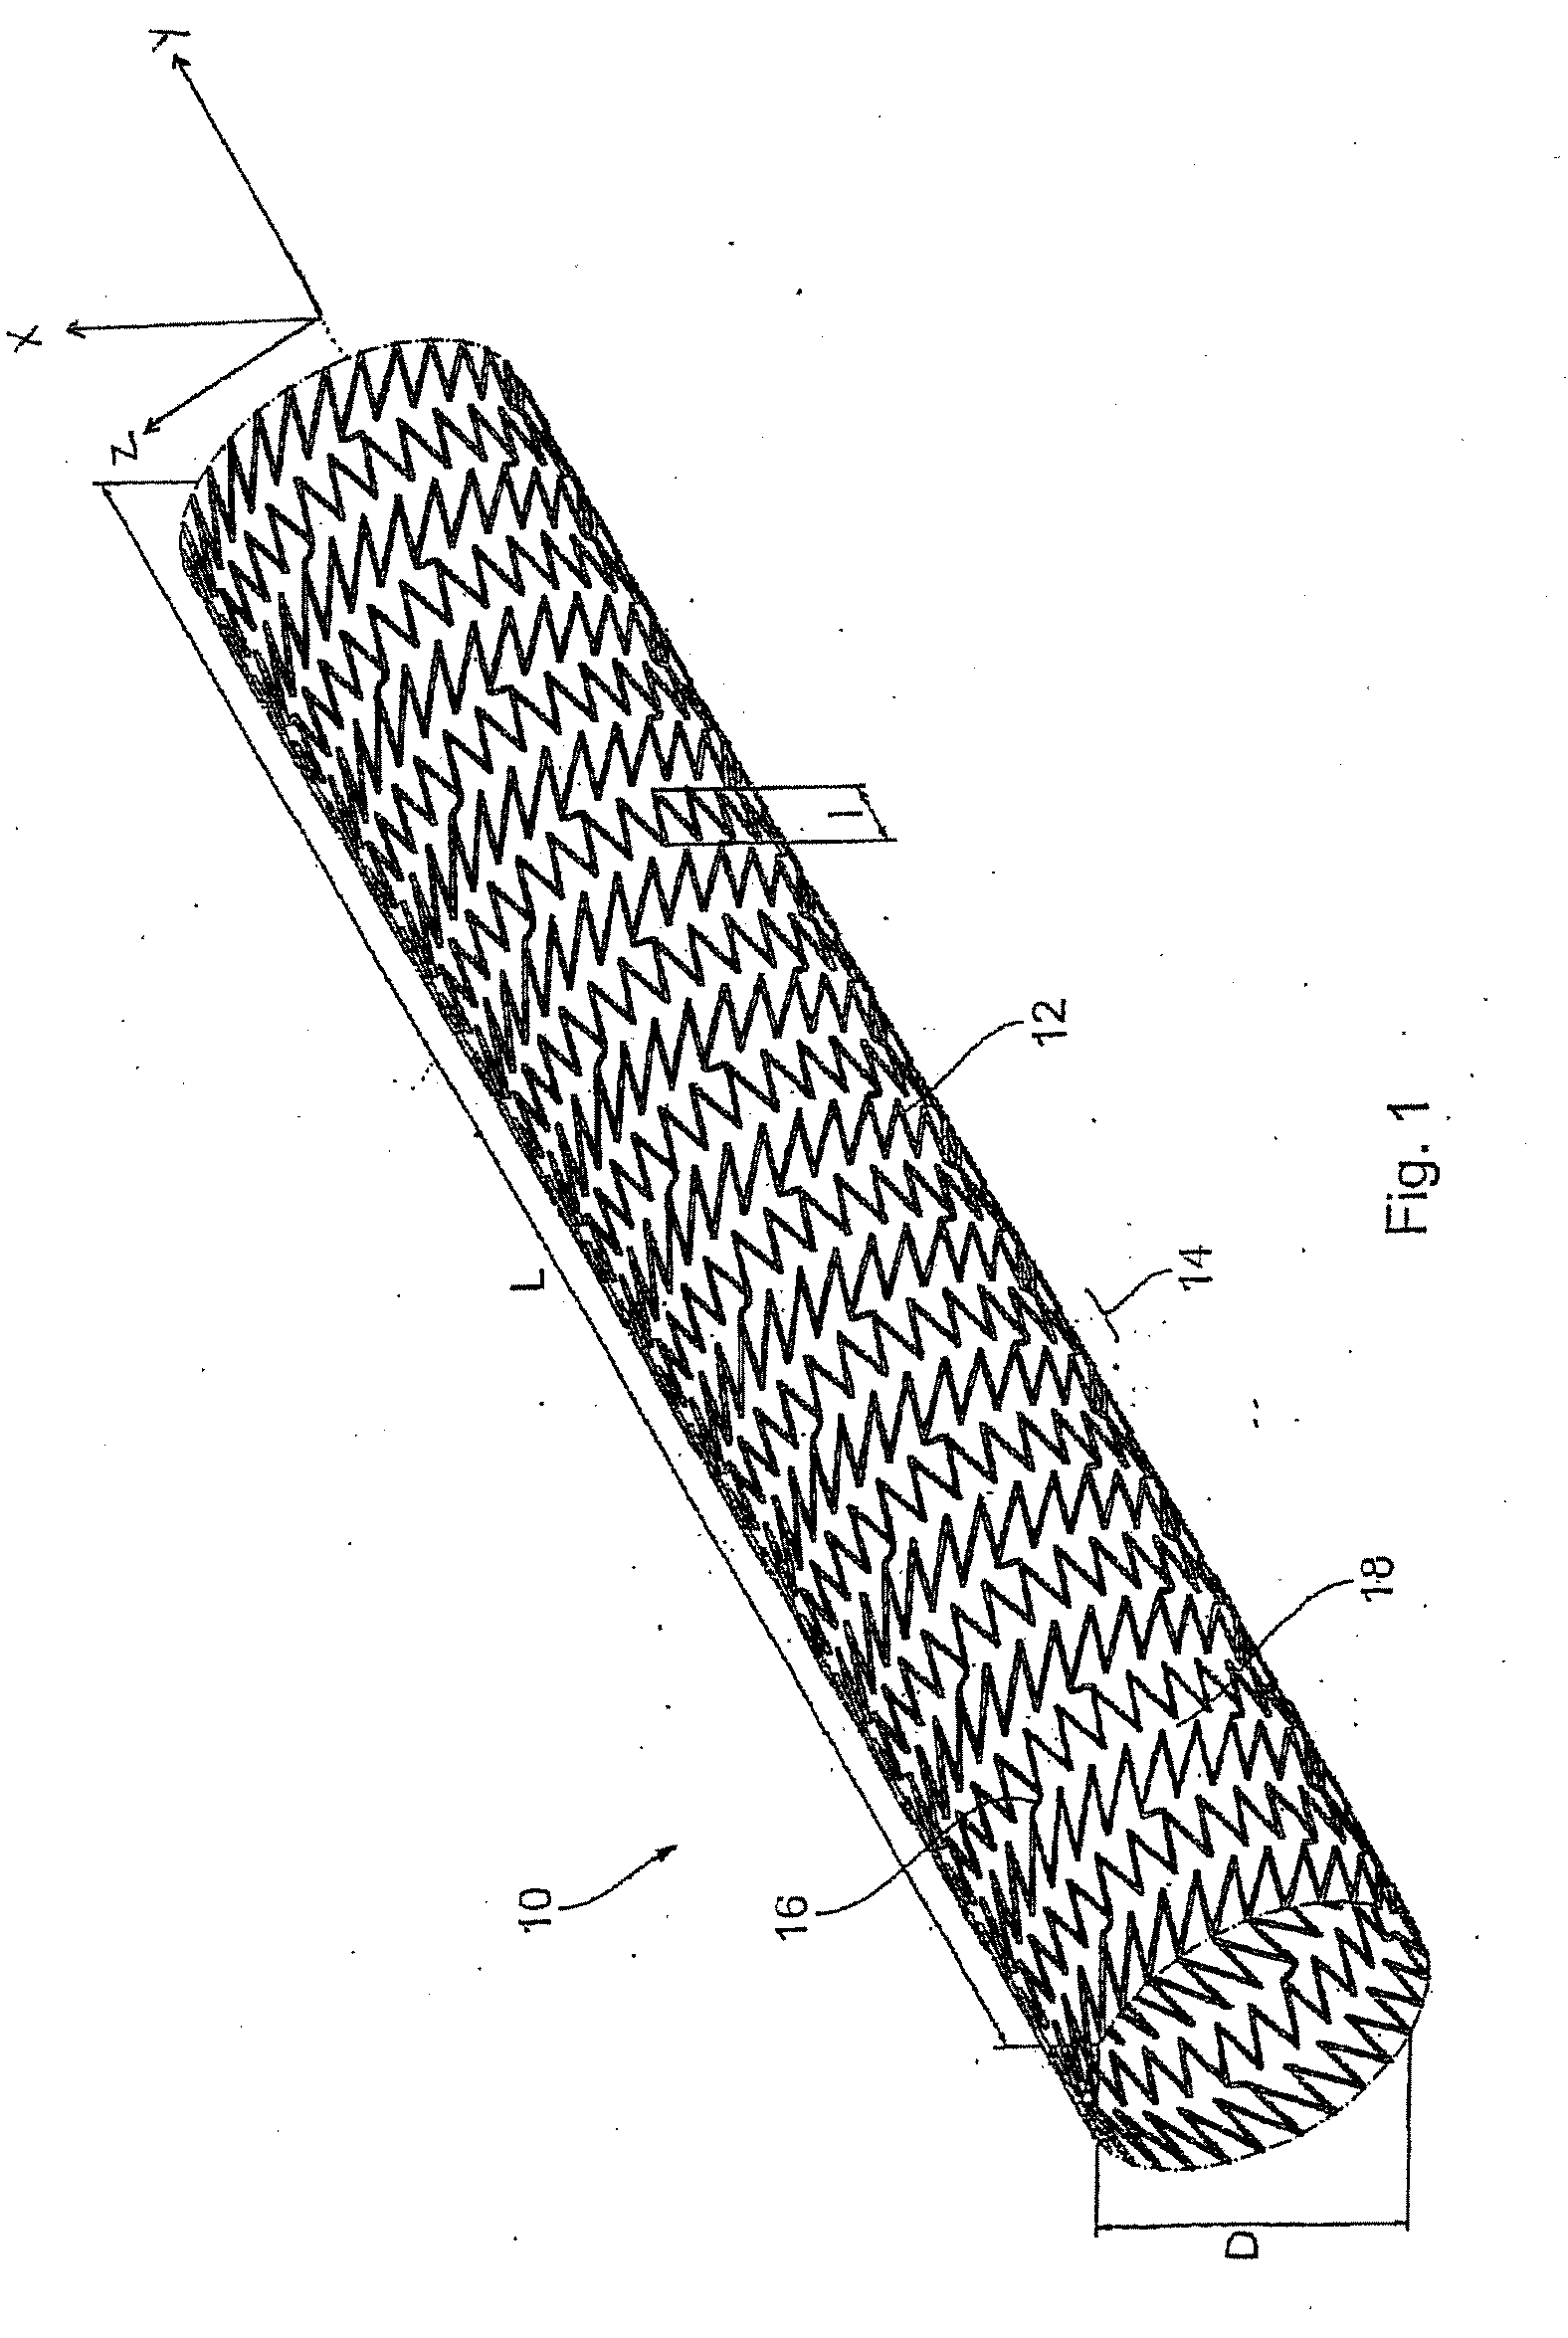 Specially configured and surface modified medical device with certain design features that utilize the intrinsic properties of tungsten, zirconium, tantalum and/or niobium